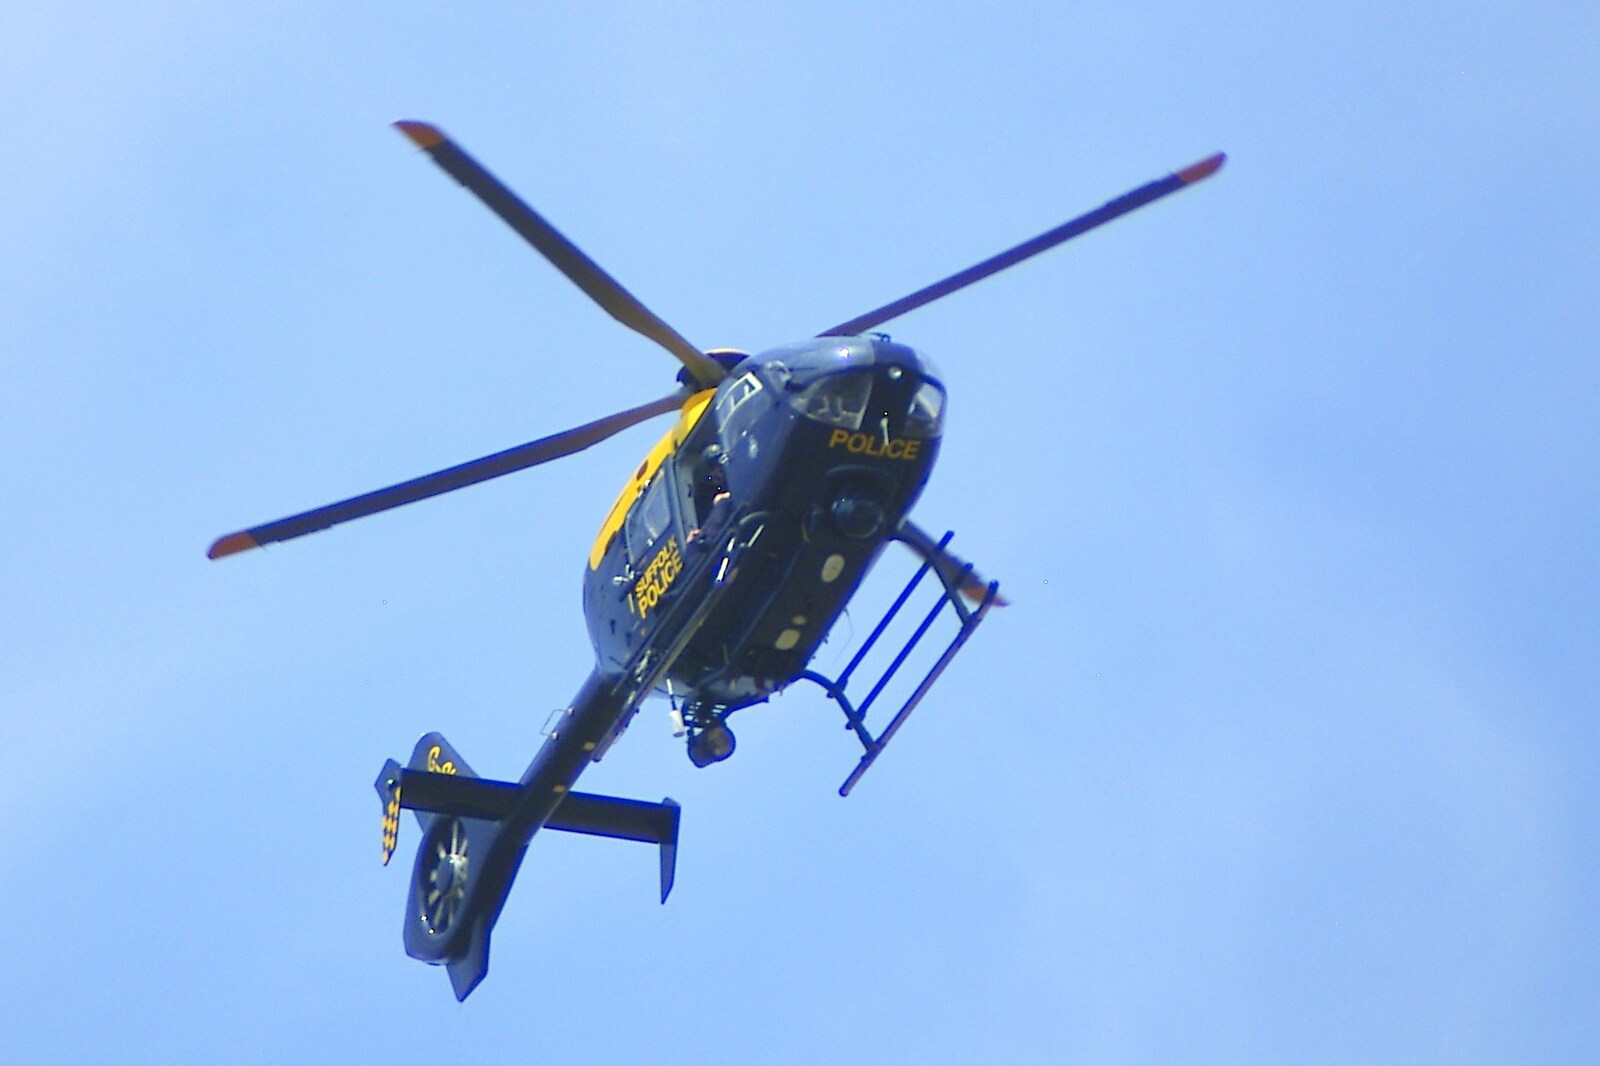 A police 'spotter chopper' surveys the scene from Shakespeare at St. John's, Parker's Piece and the A14's Worst Day - 17th July 2006